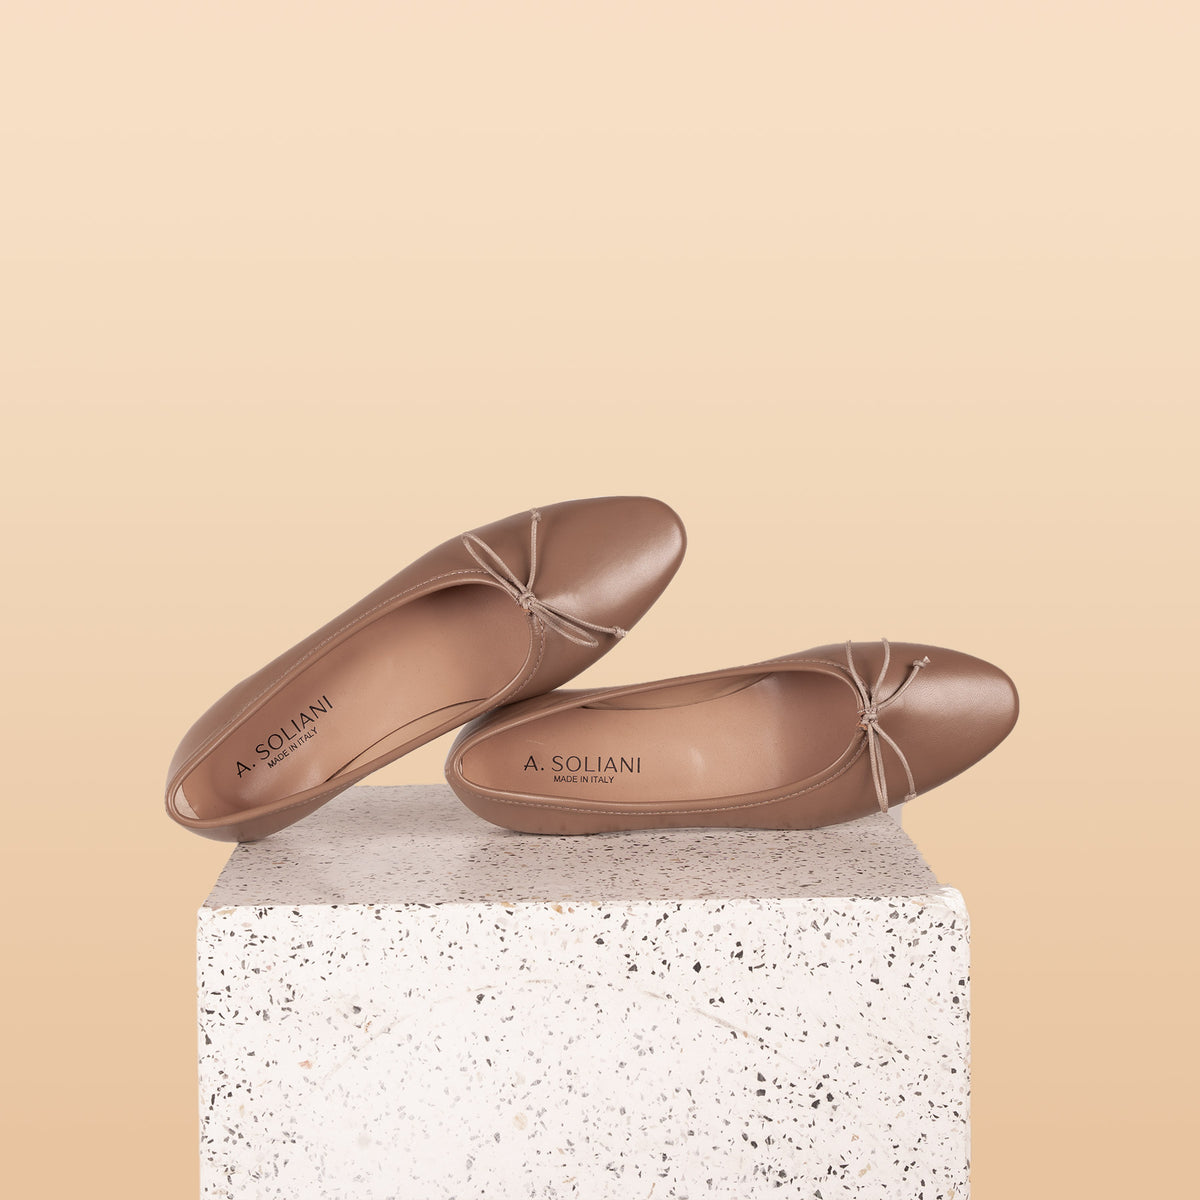 Italian Leather Ballet Flats Como in Taupe